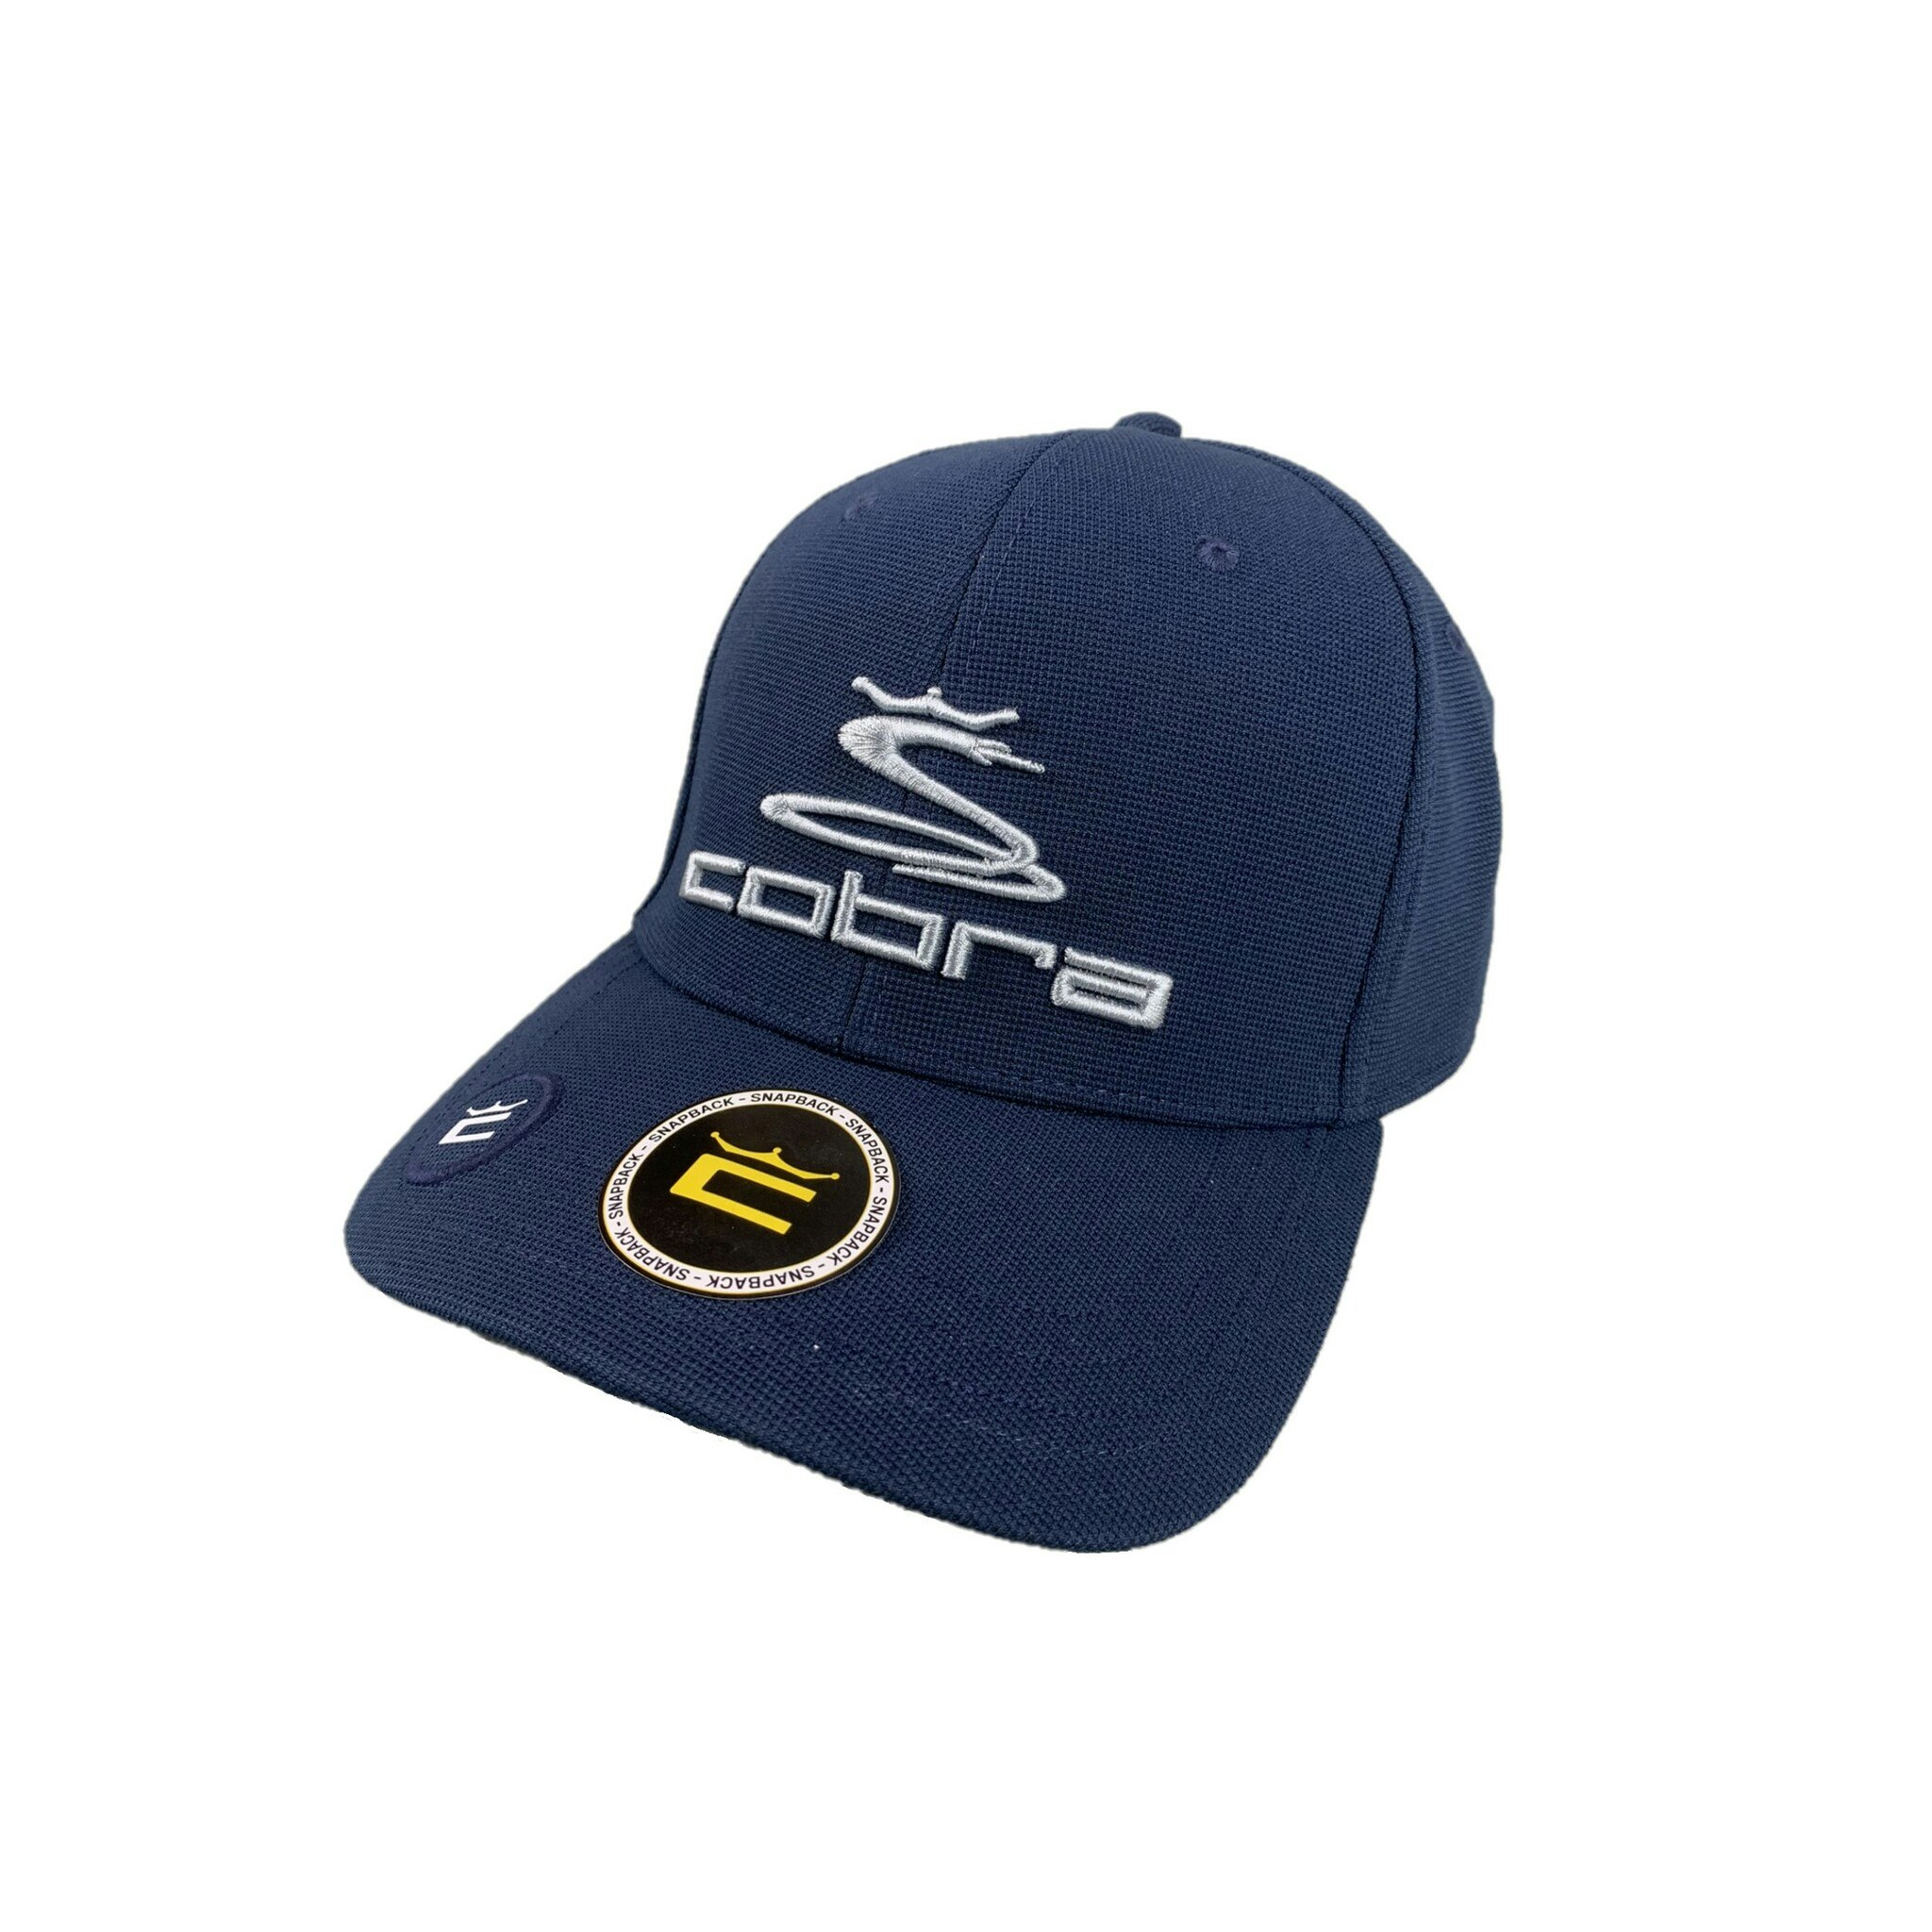 COBRA BALL MARKER KEPS NAVY - SPORTS and GOLF